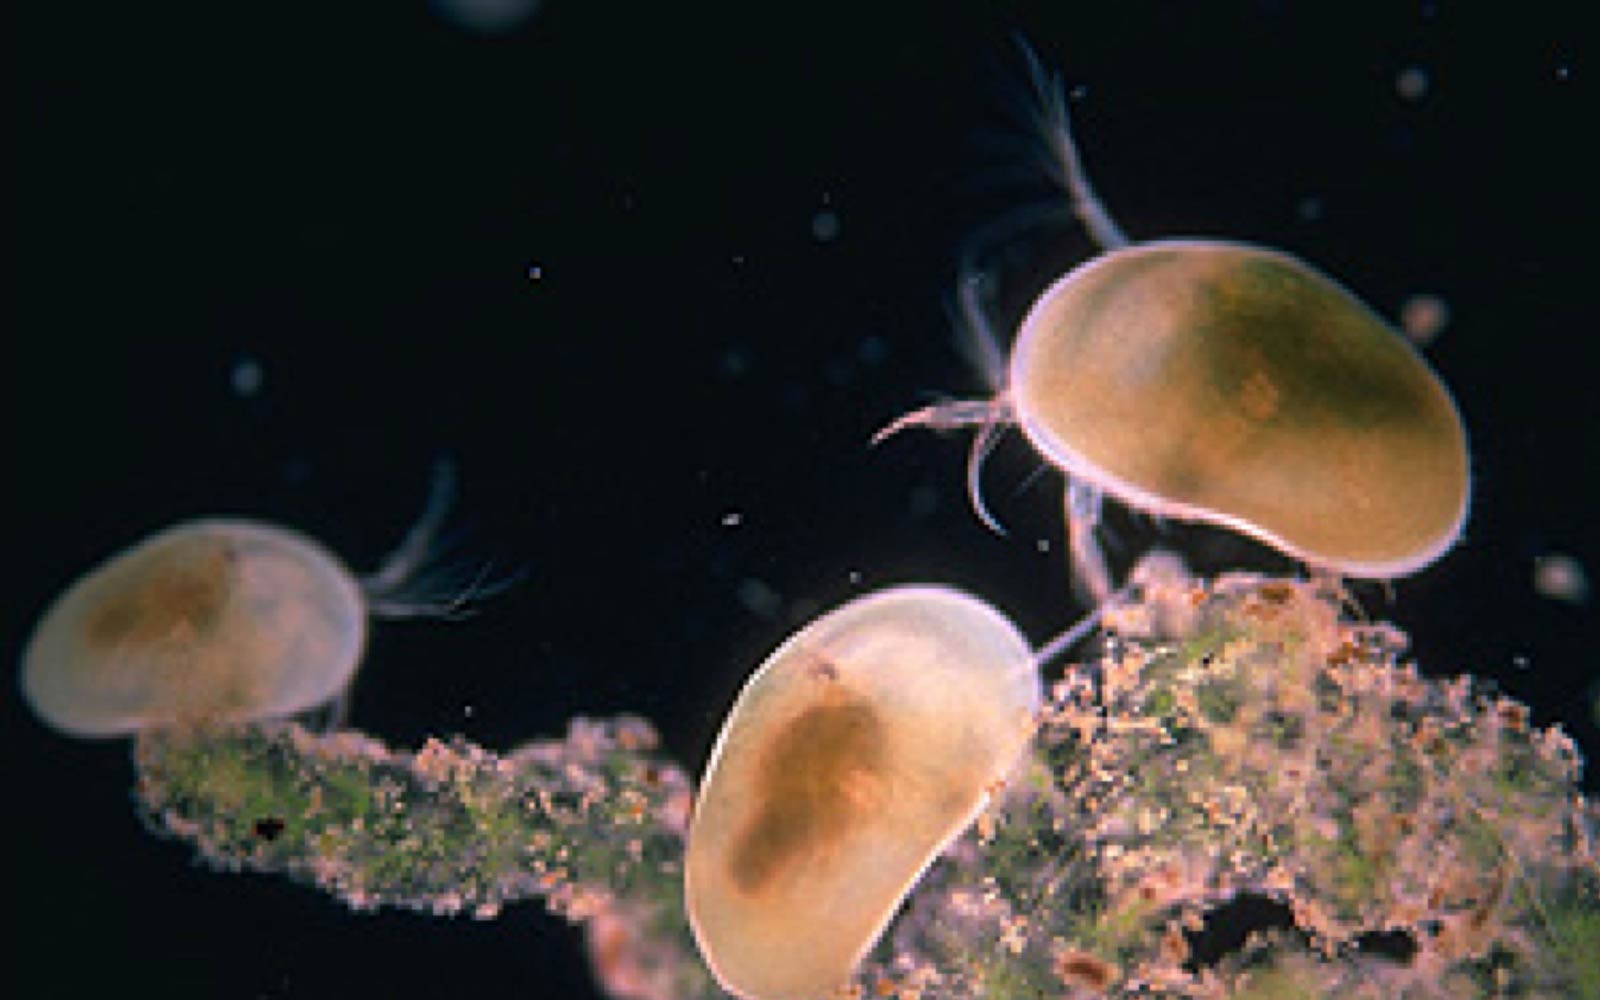 free Ostracod wallpaper wallpapers download